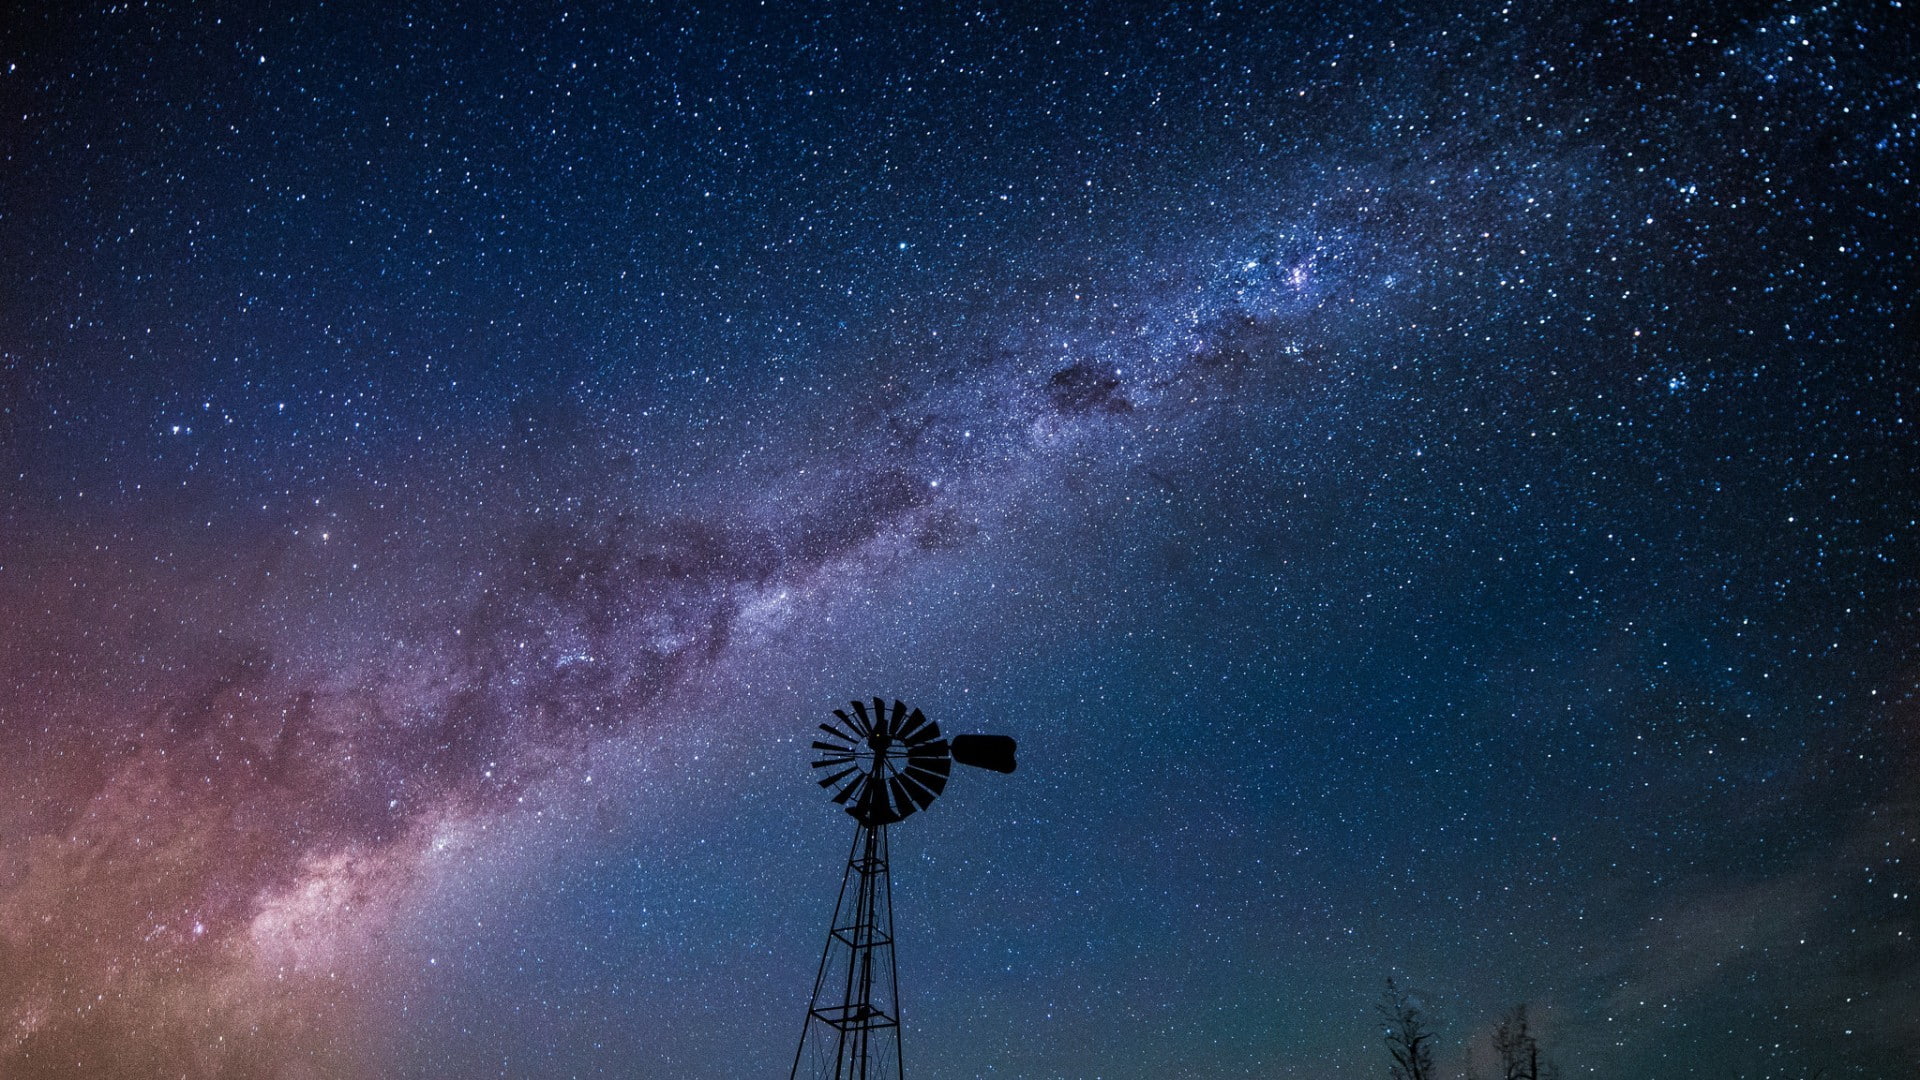 Nature, Landscape, Night, Stars, Long exposure, Clear sky, Tower, Trees, Milky Way, Wheels, Silhouette, black windmill on nighttime painting